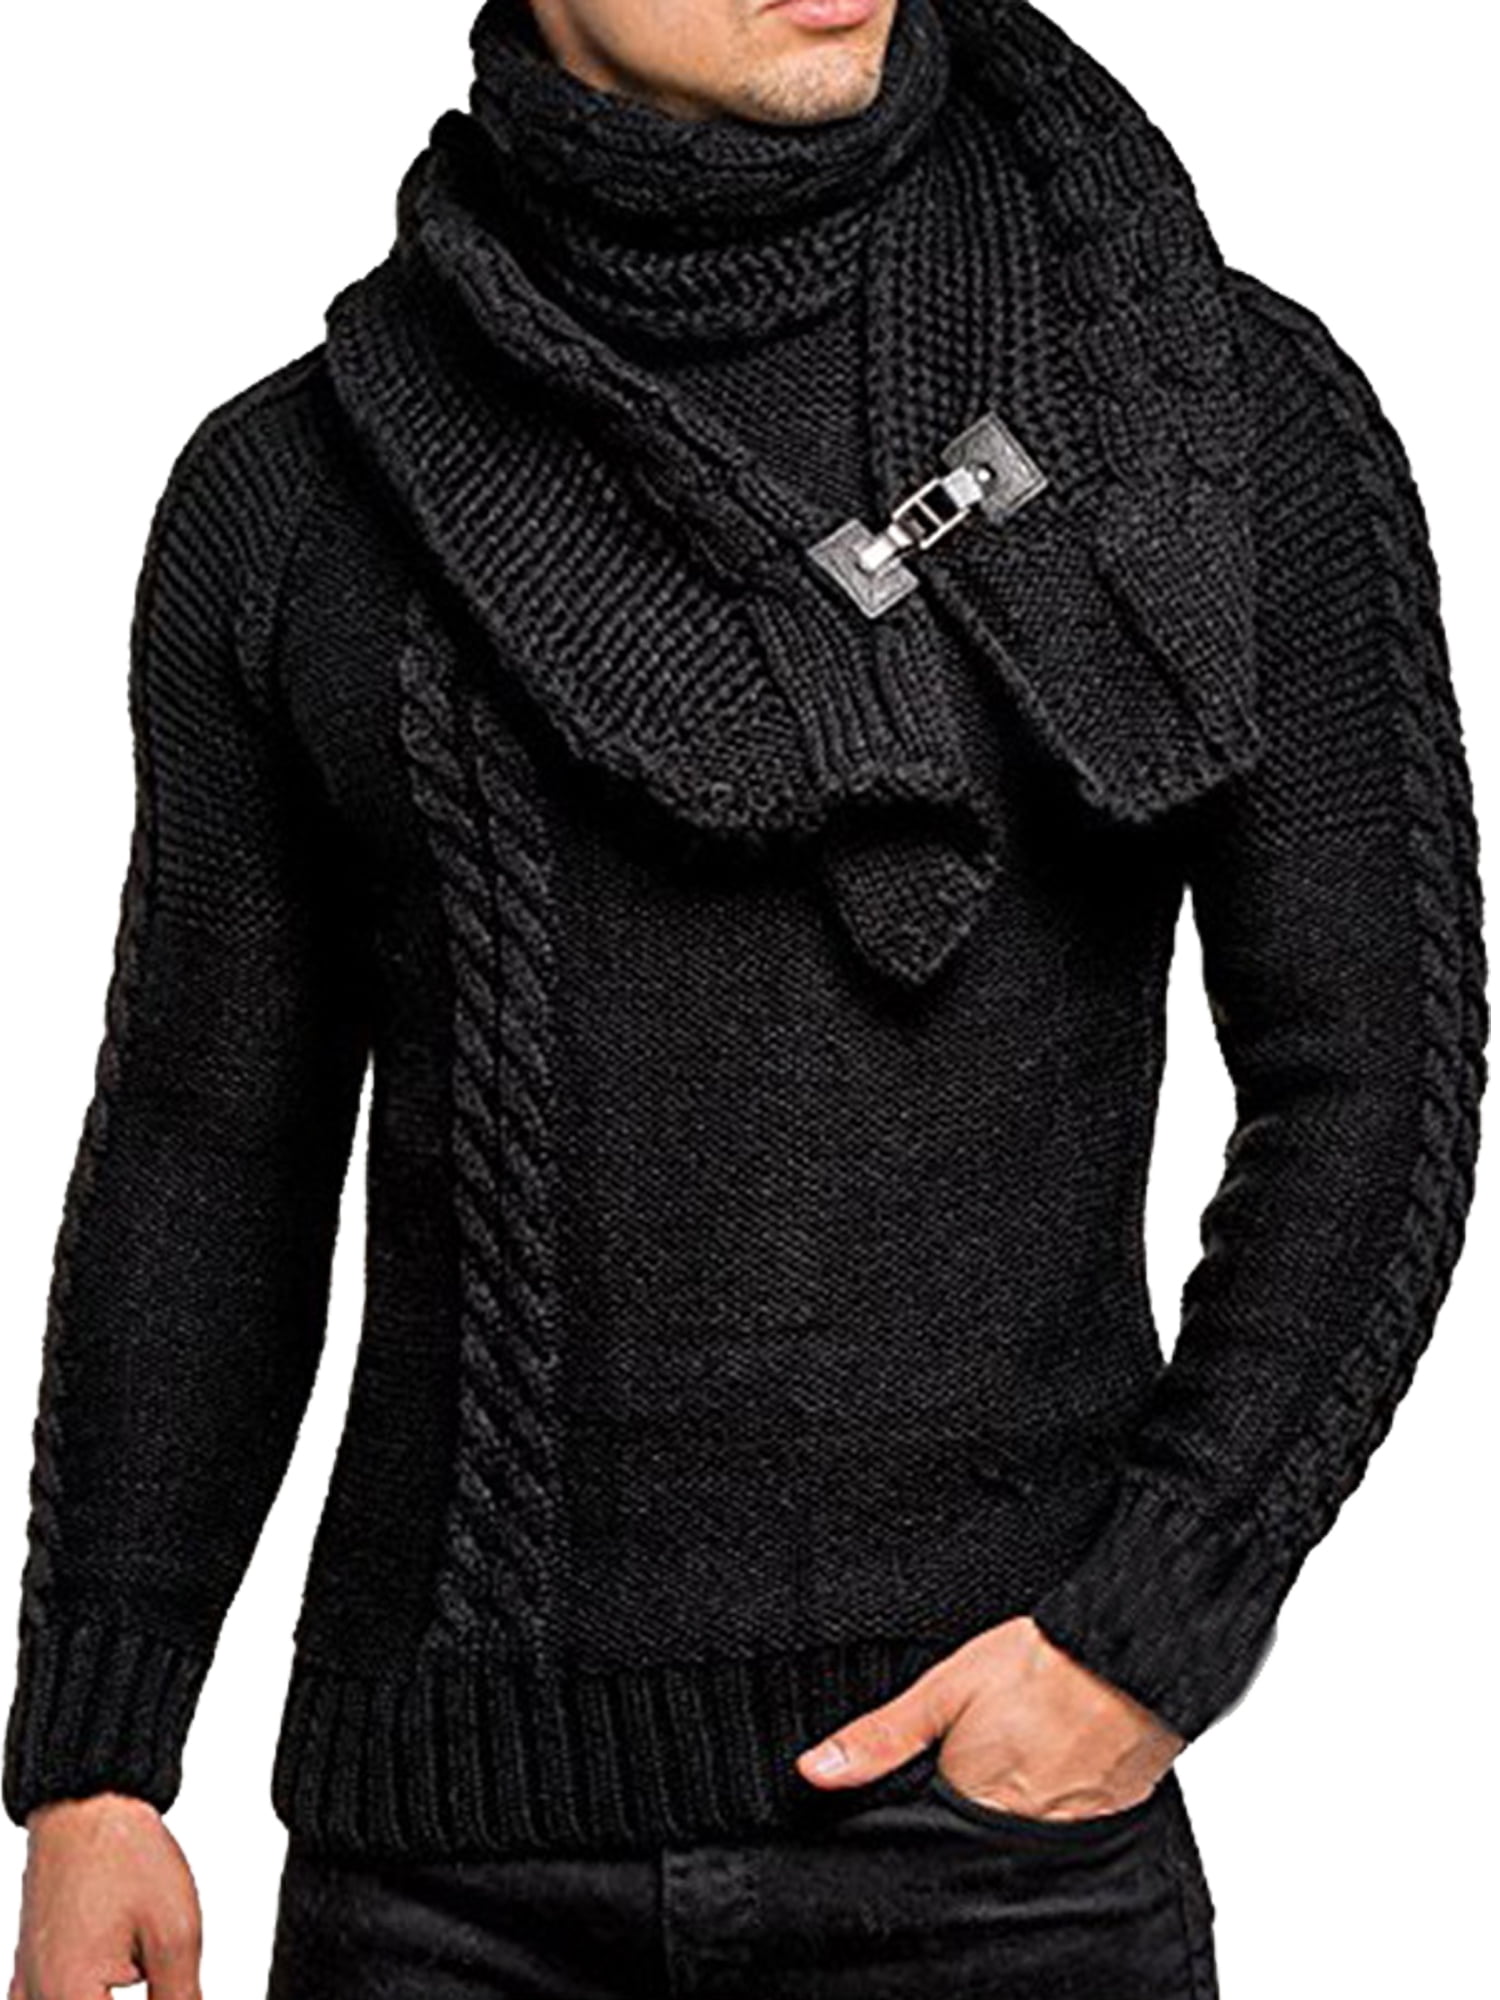 COOFANDY Men's Shawl Collar Cardigan Sweater Slim Fit Casual Cable Knitted Sweaters with Buttons and Pockets 